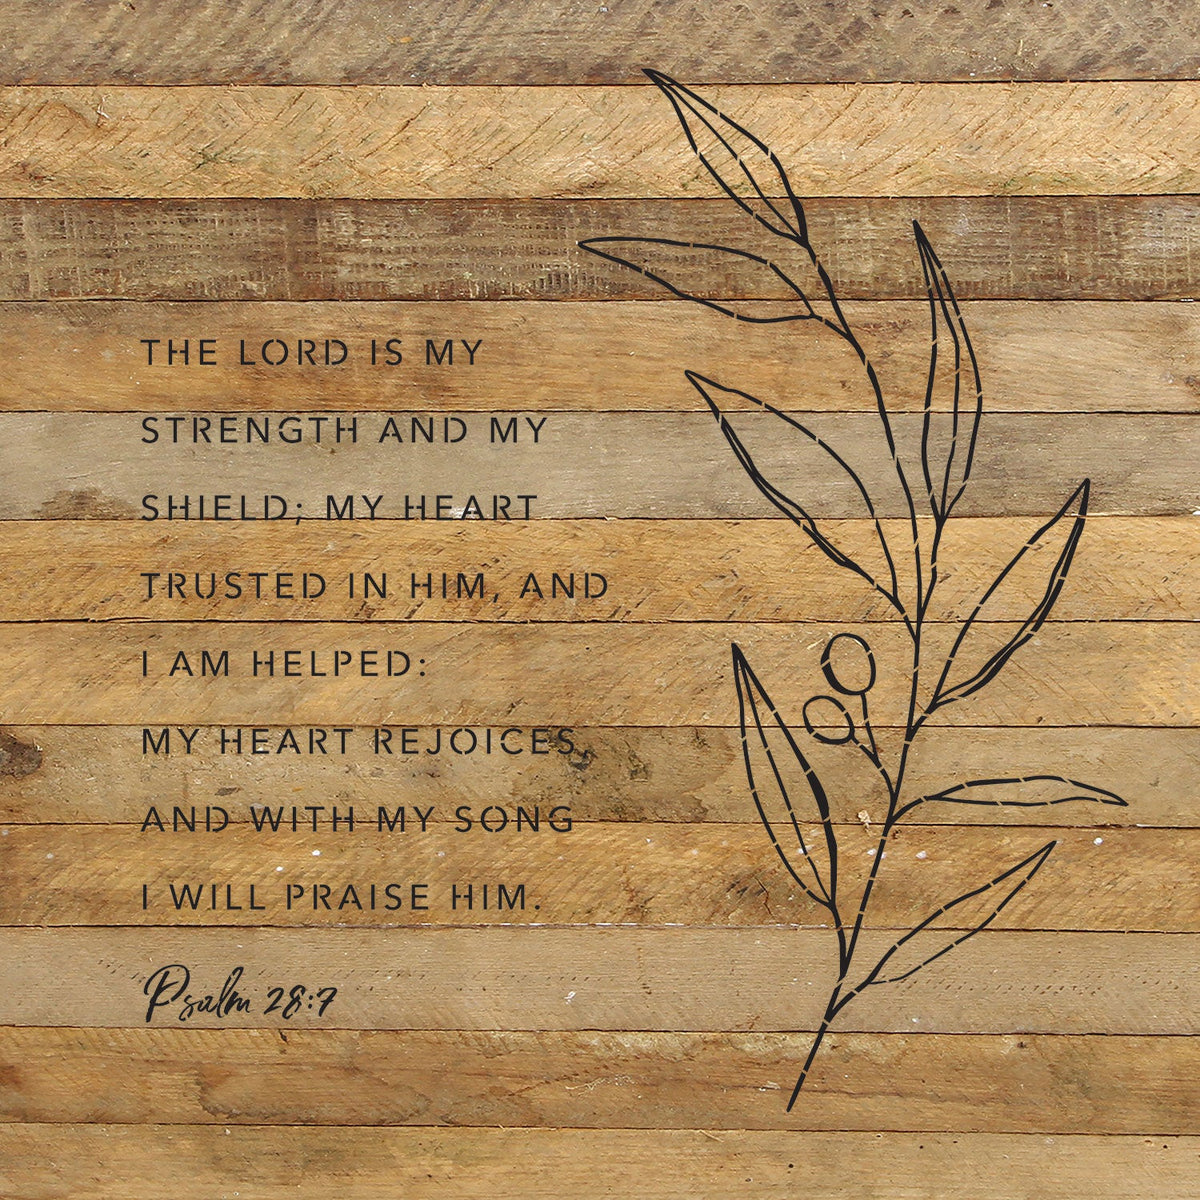 The Lord is my strength and my shield. My heart trusted in him and I am helped. My heart rejoices and with my song I will praise him / 28x28 Reclaimed Wood Wall Decor